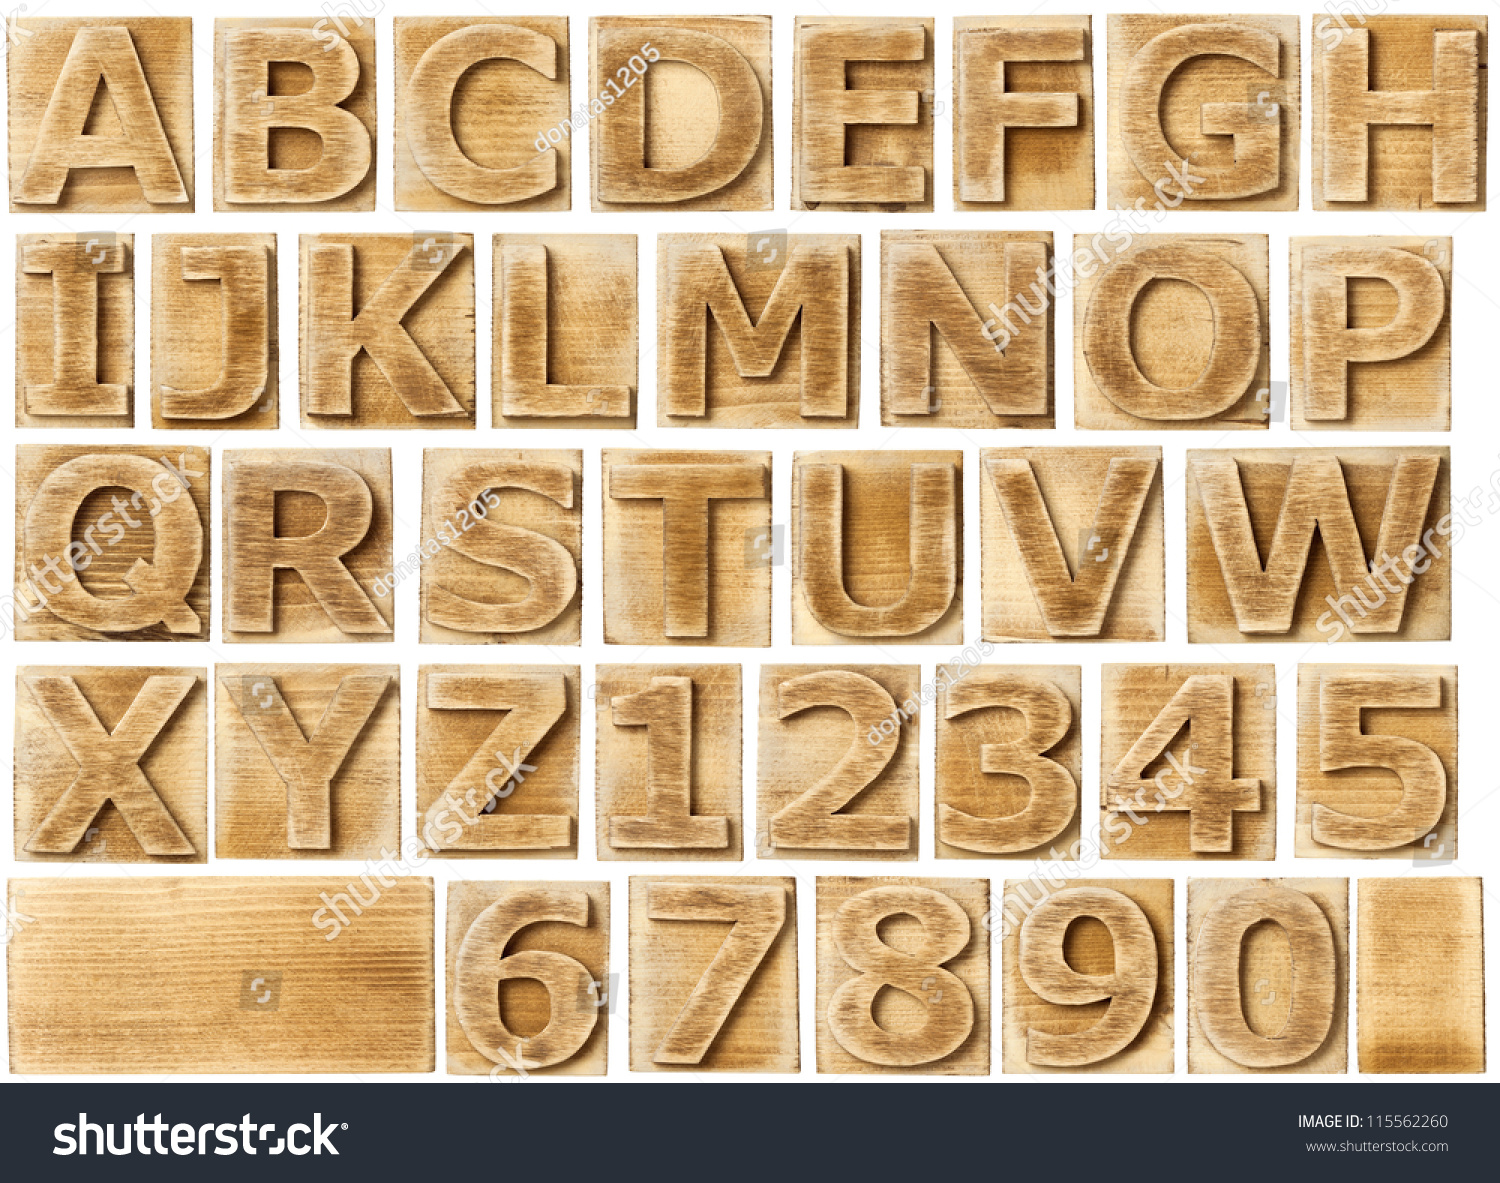 Wooden alphabet blocks with letters and numbers. #115562260